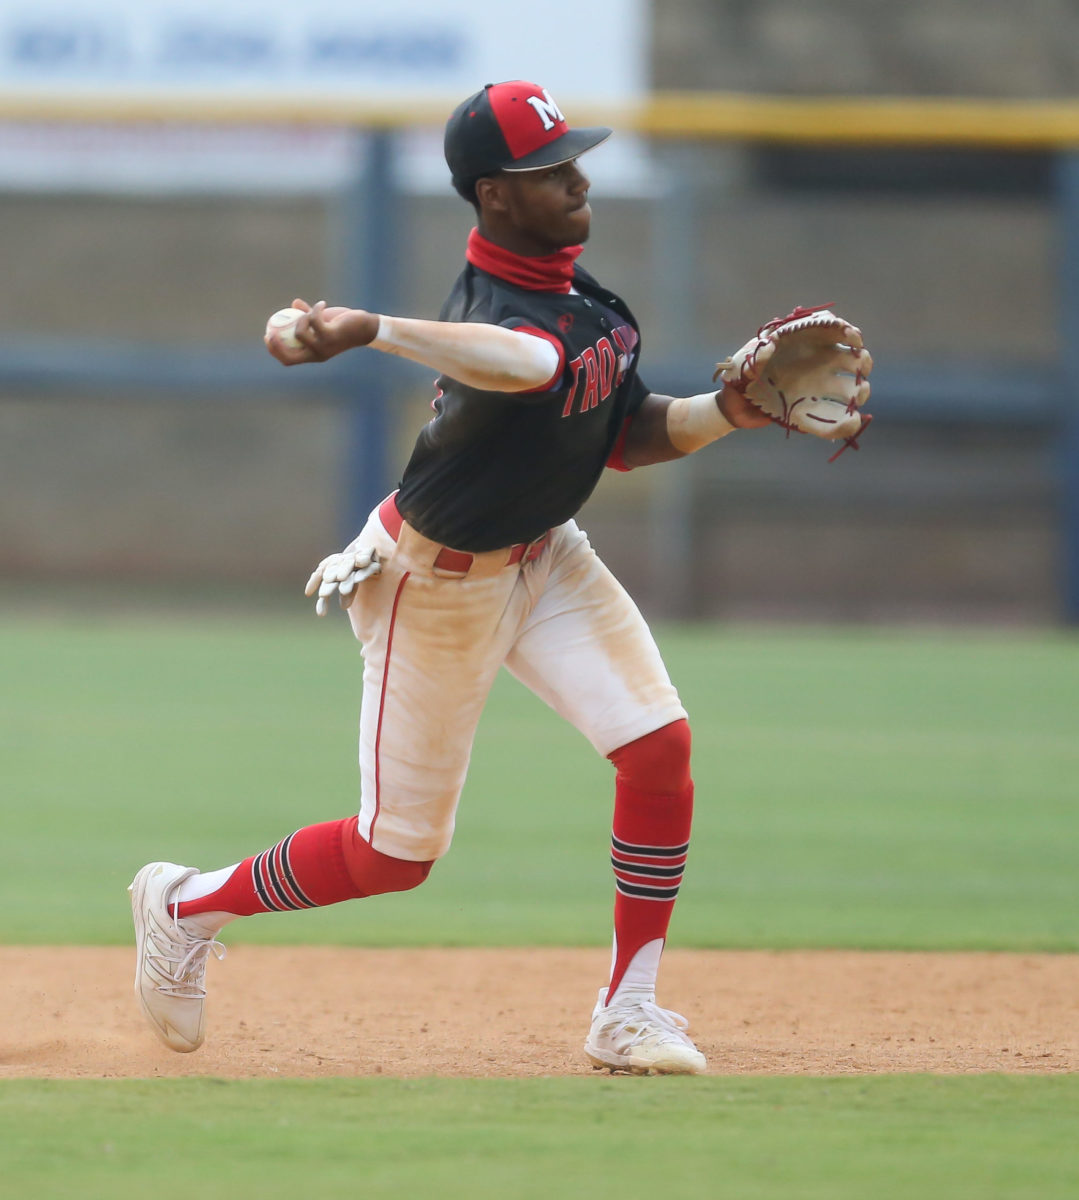 Magee's Brennon McNair (4) makes a throw to first base for an out. Booneville and Magee played in game 1 of the MHSAA Class 3A Baseball Championship on Tuesday, June 1, 2021 at Trustmark Park. Photo by Keith Warren